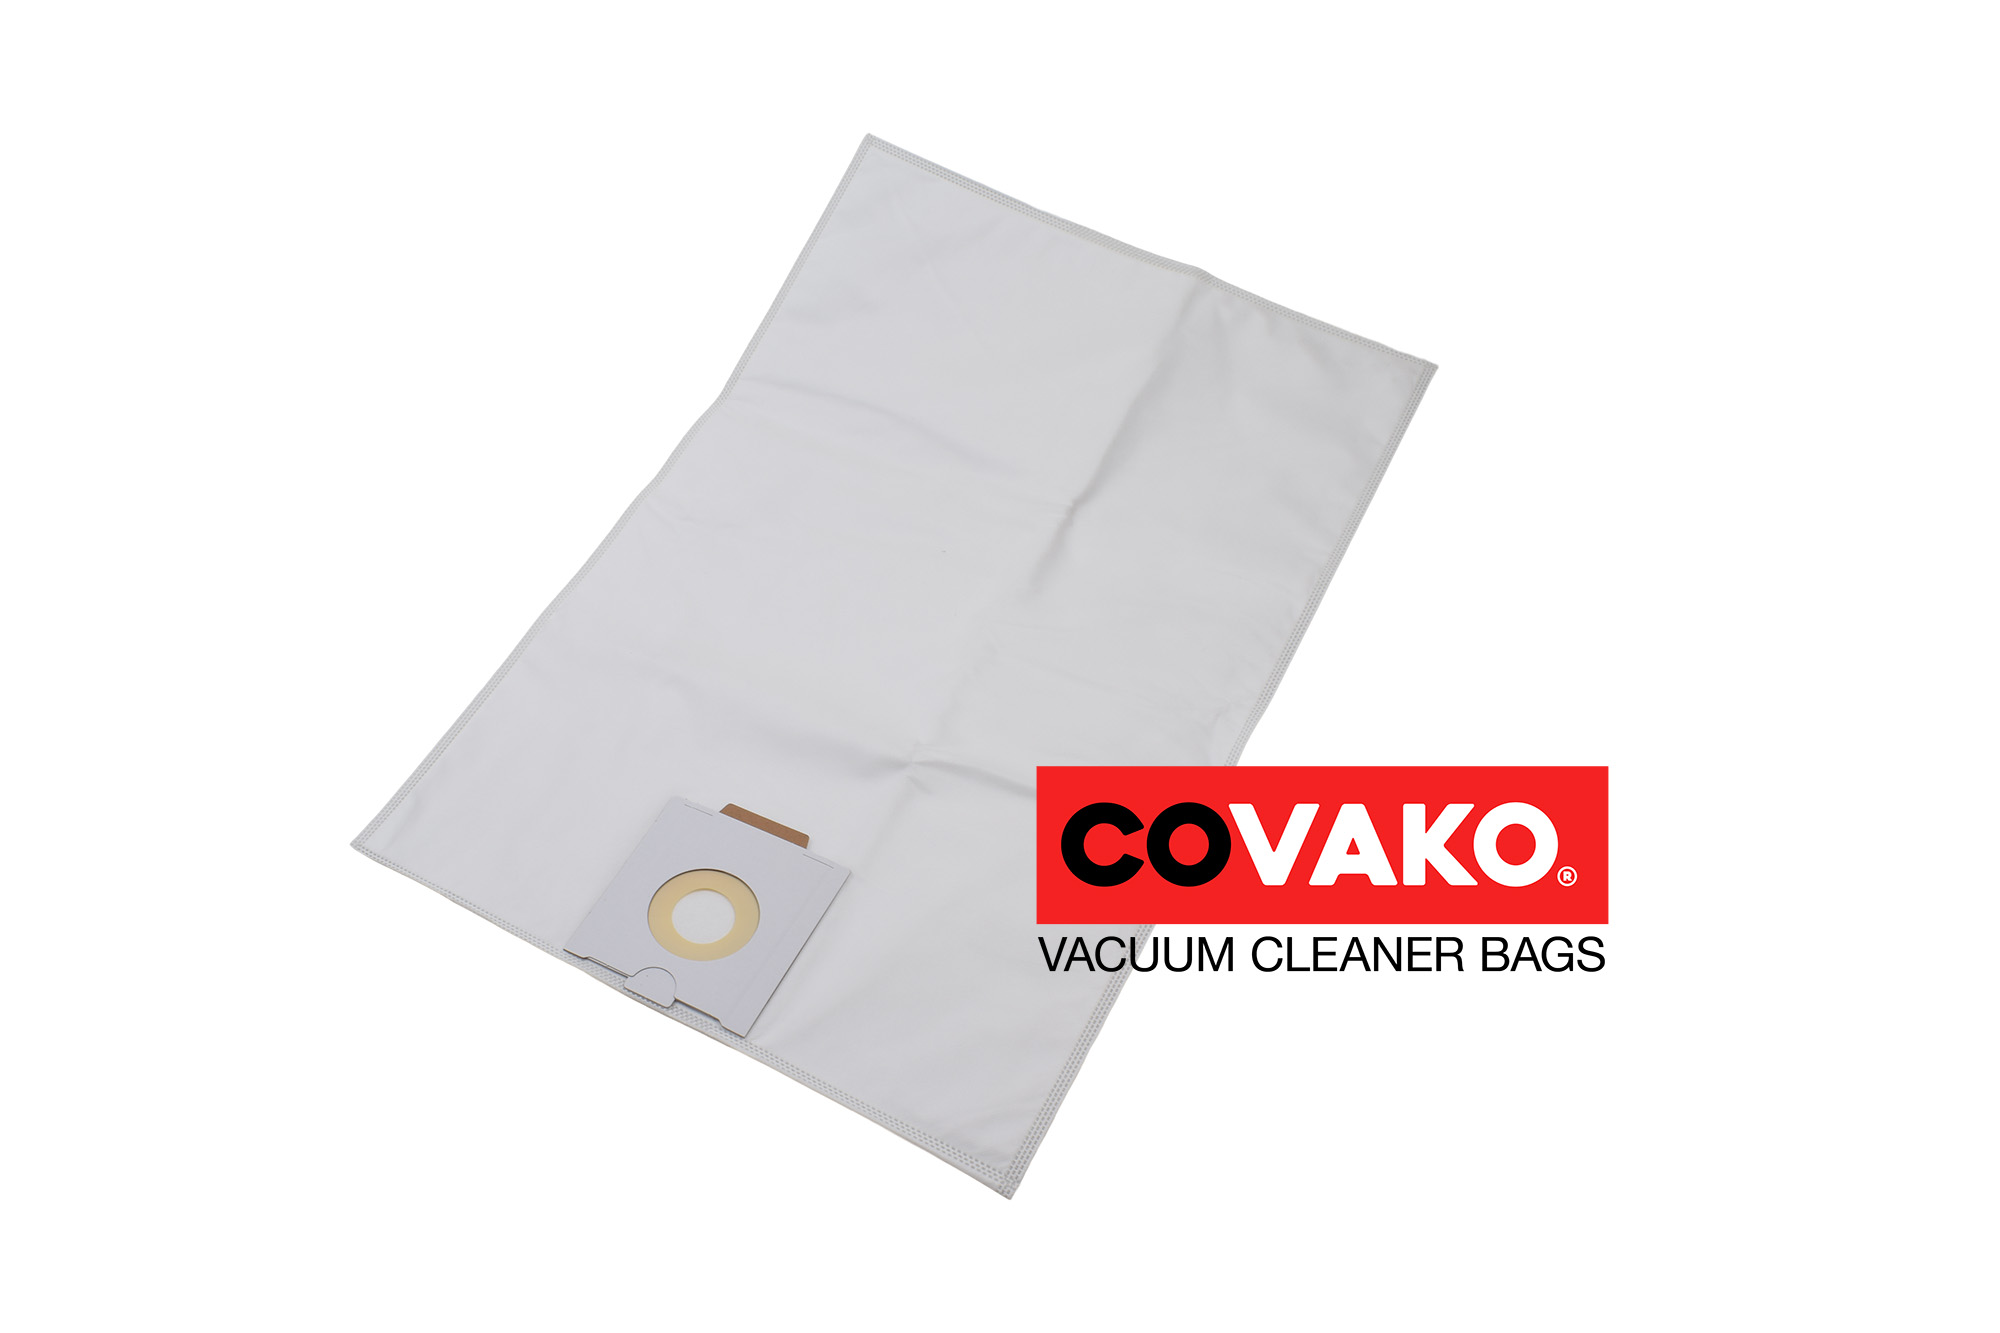 Protool VCP 360 / Synthesis - Protool vacuum cleaner bags